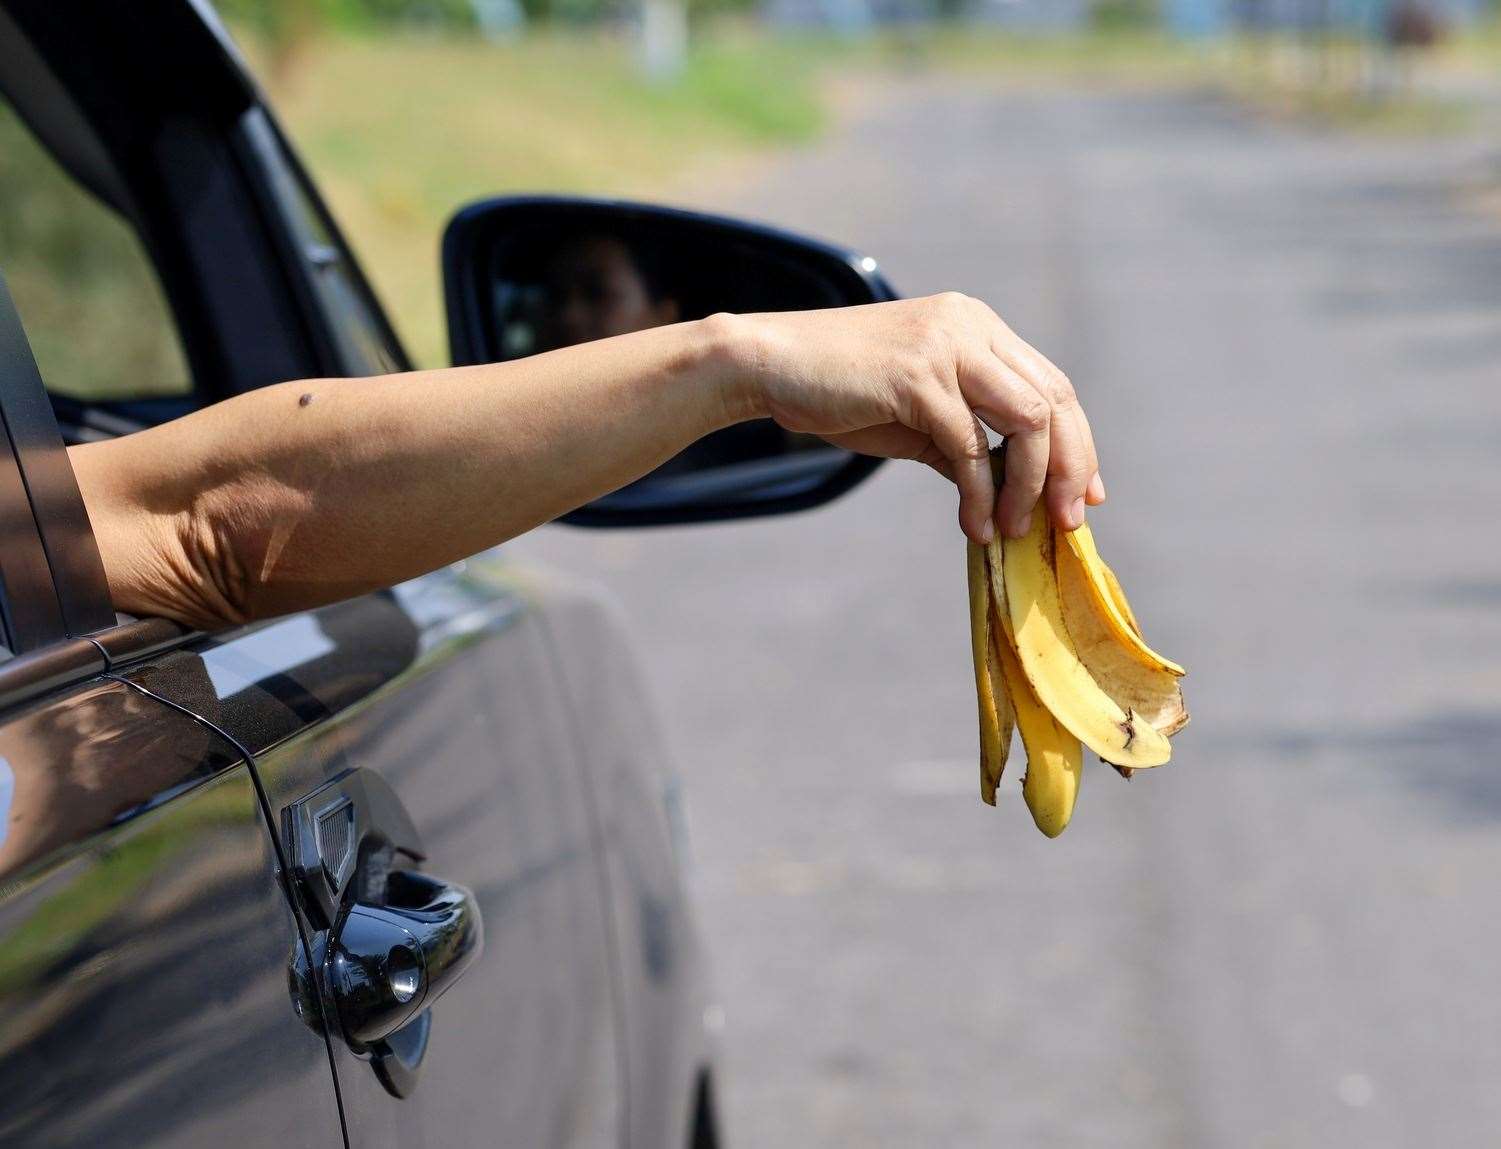 A Herne Bay man has been fined £500 after chucking a banana skin out of his van window. Picture: iStock / andri wahyudi